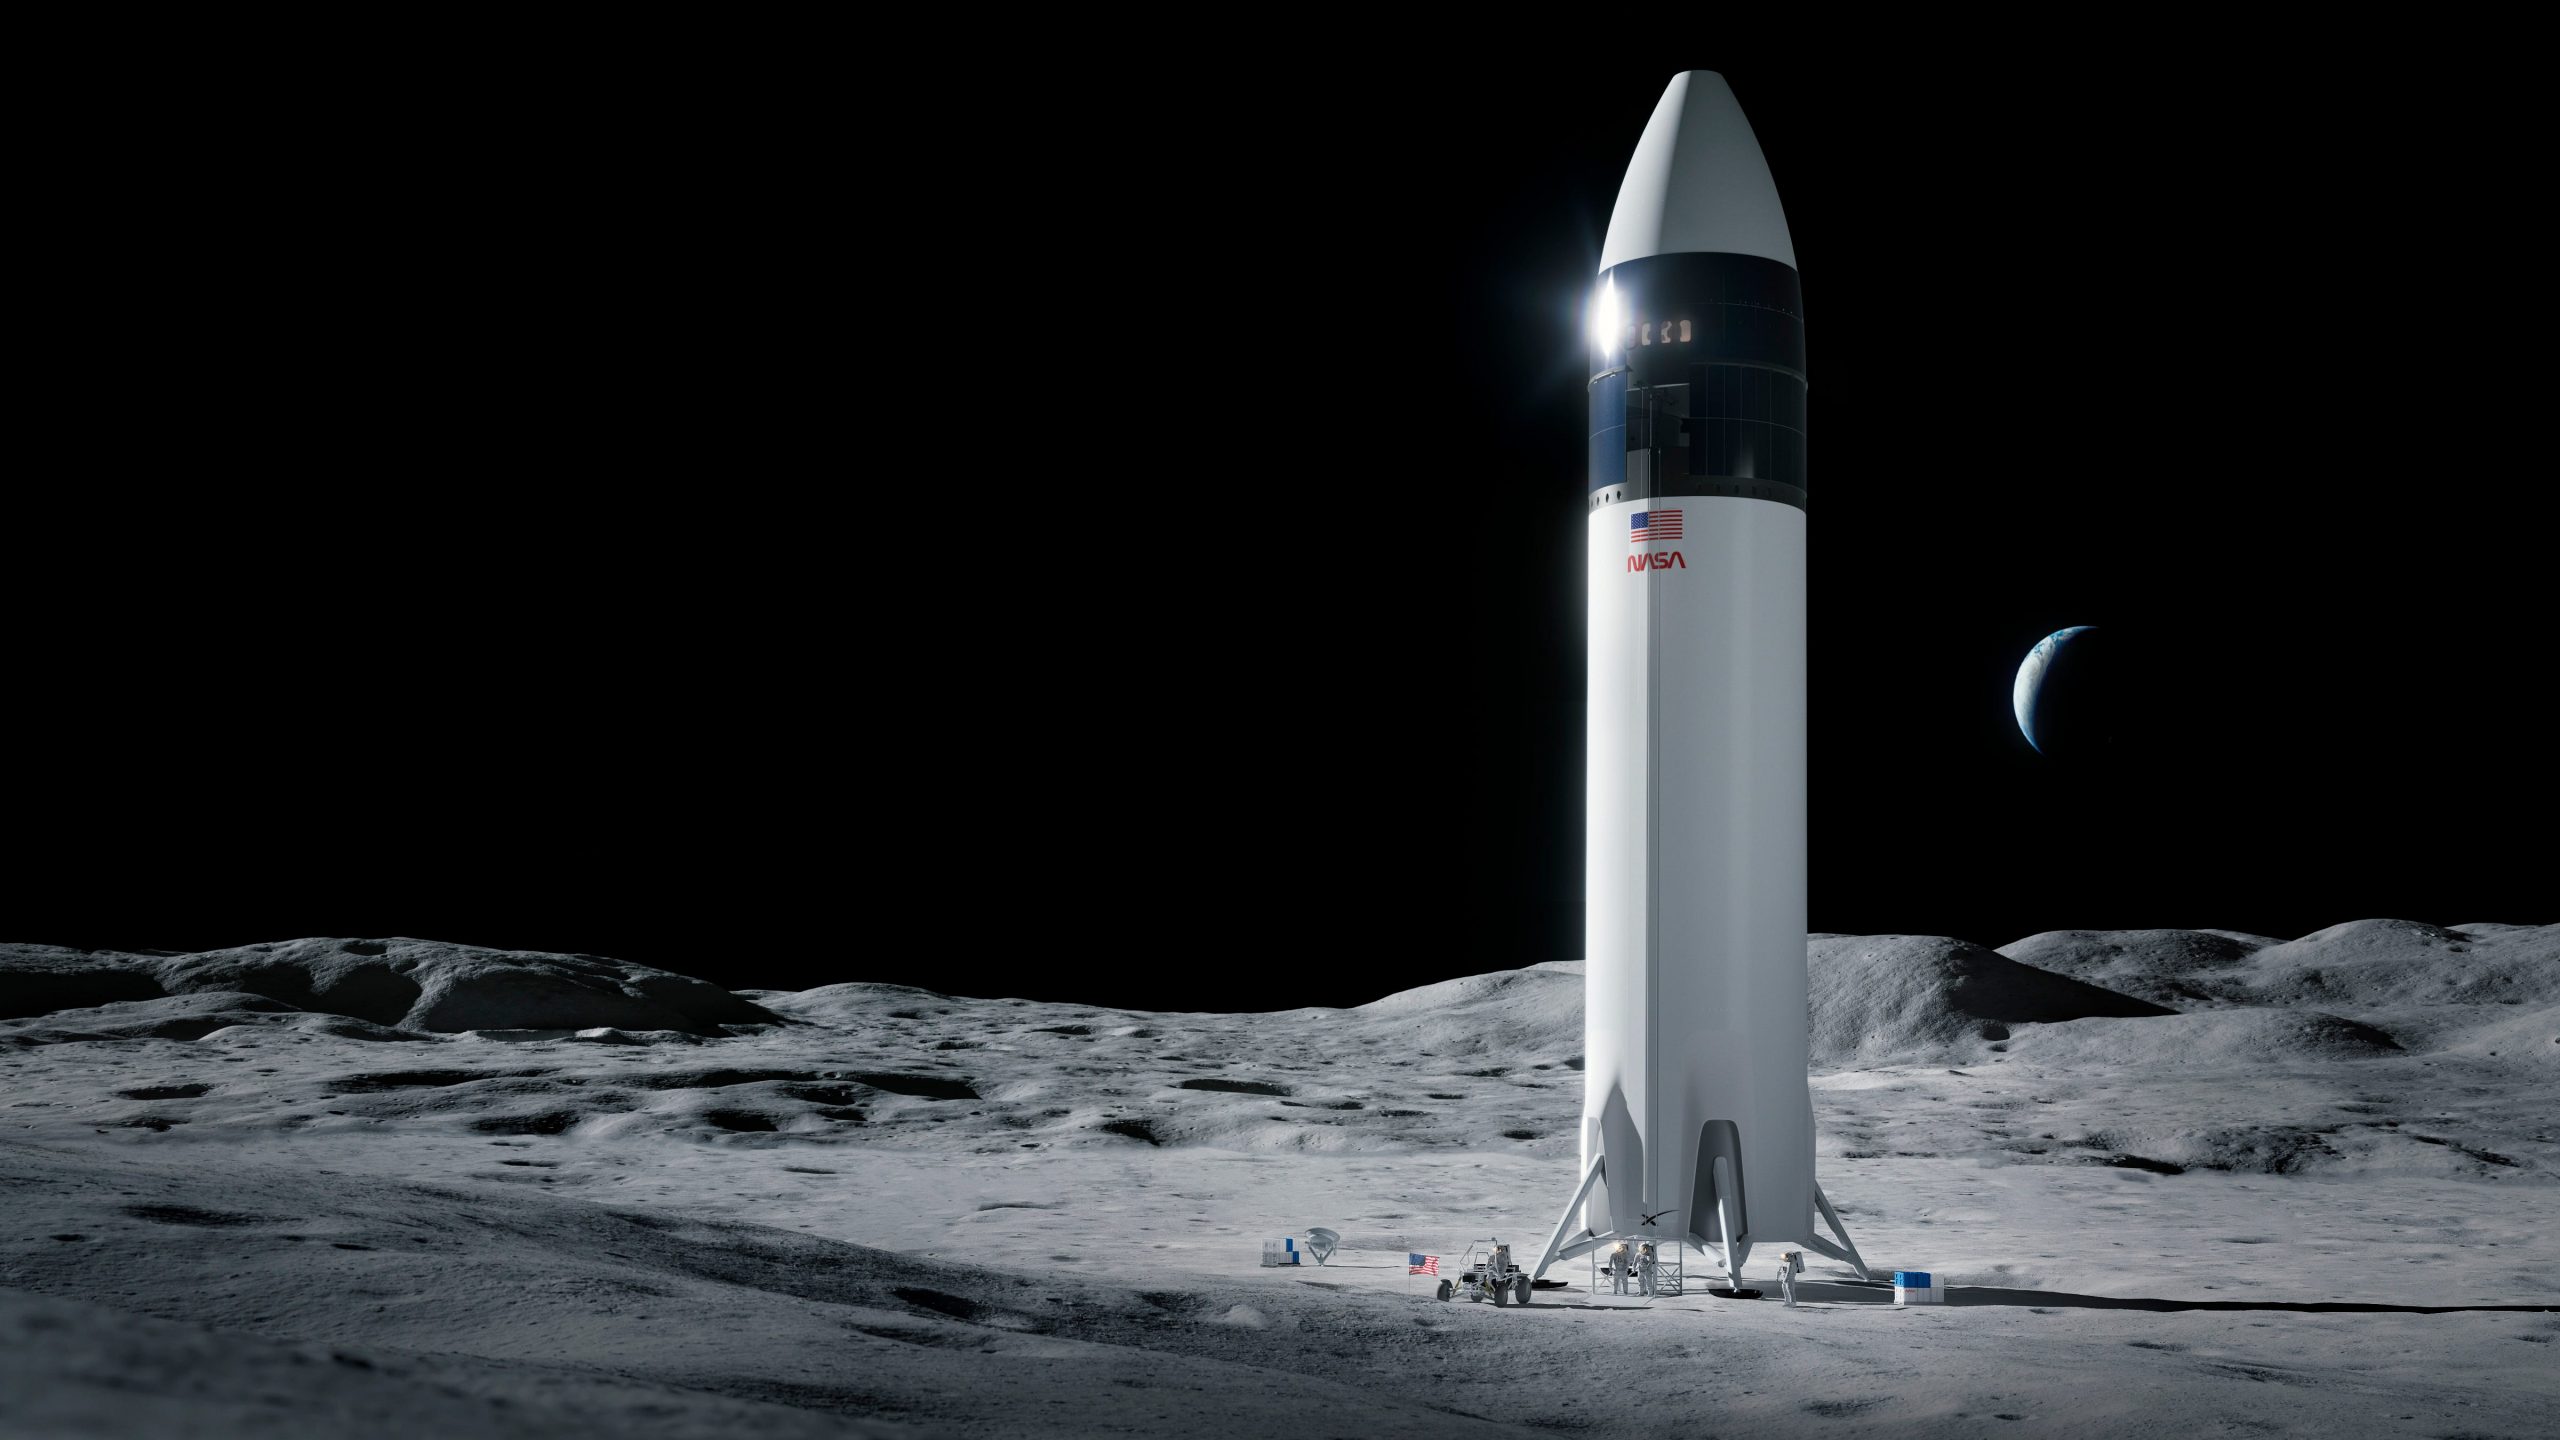 An illustration of the SpaceX Starship human lander design on the moon.